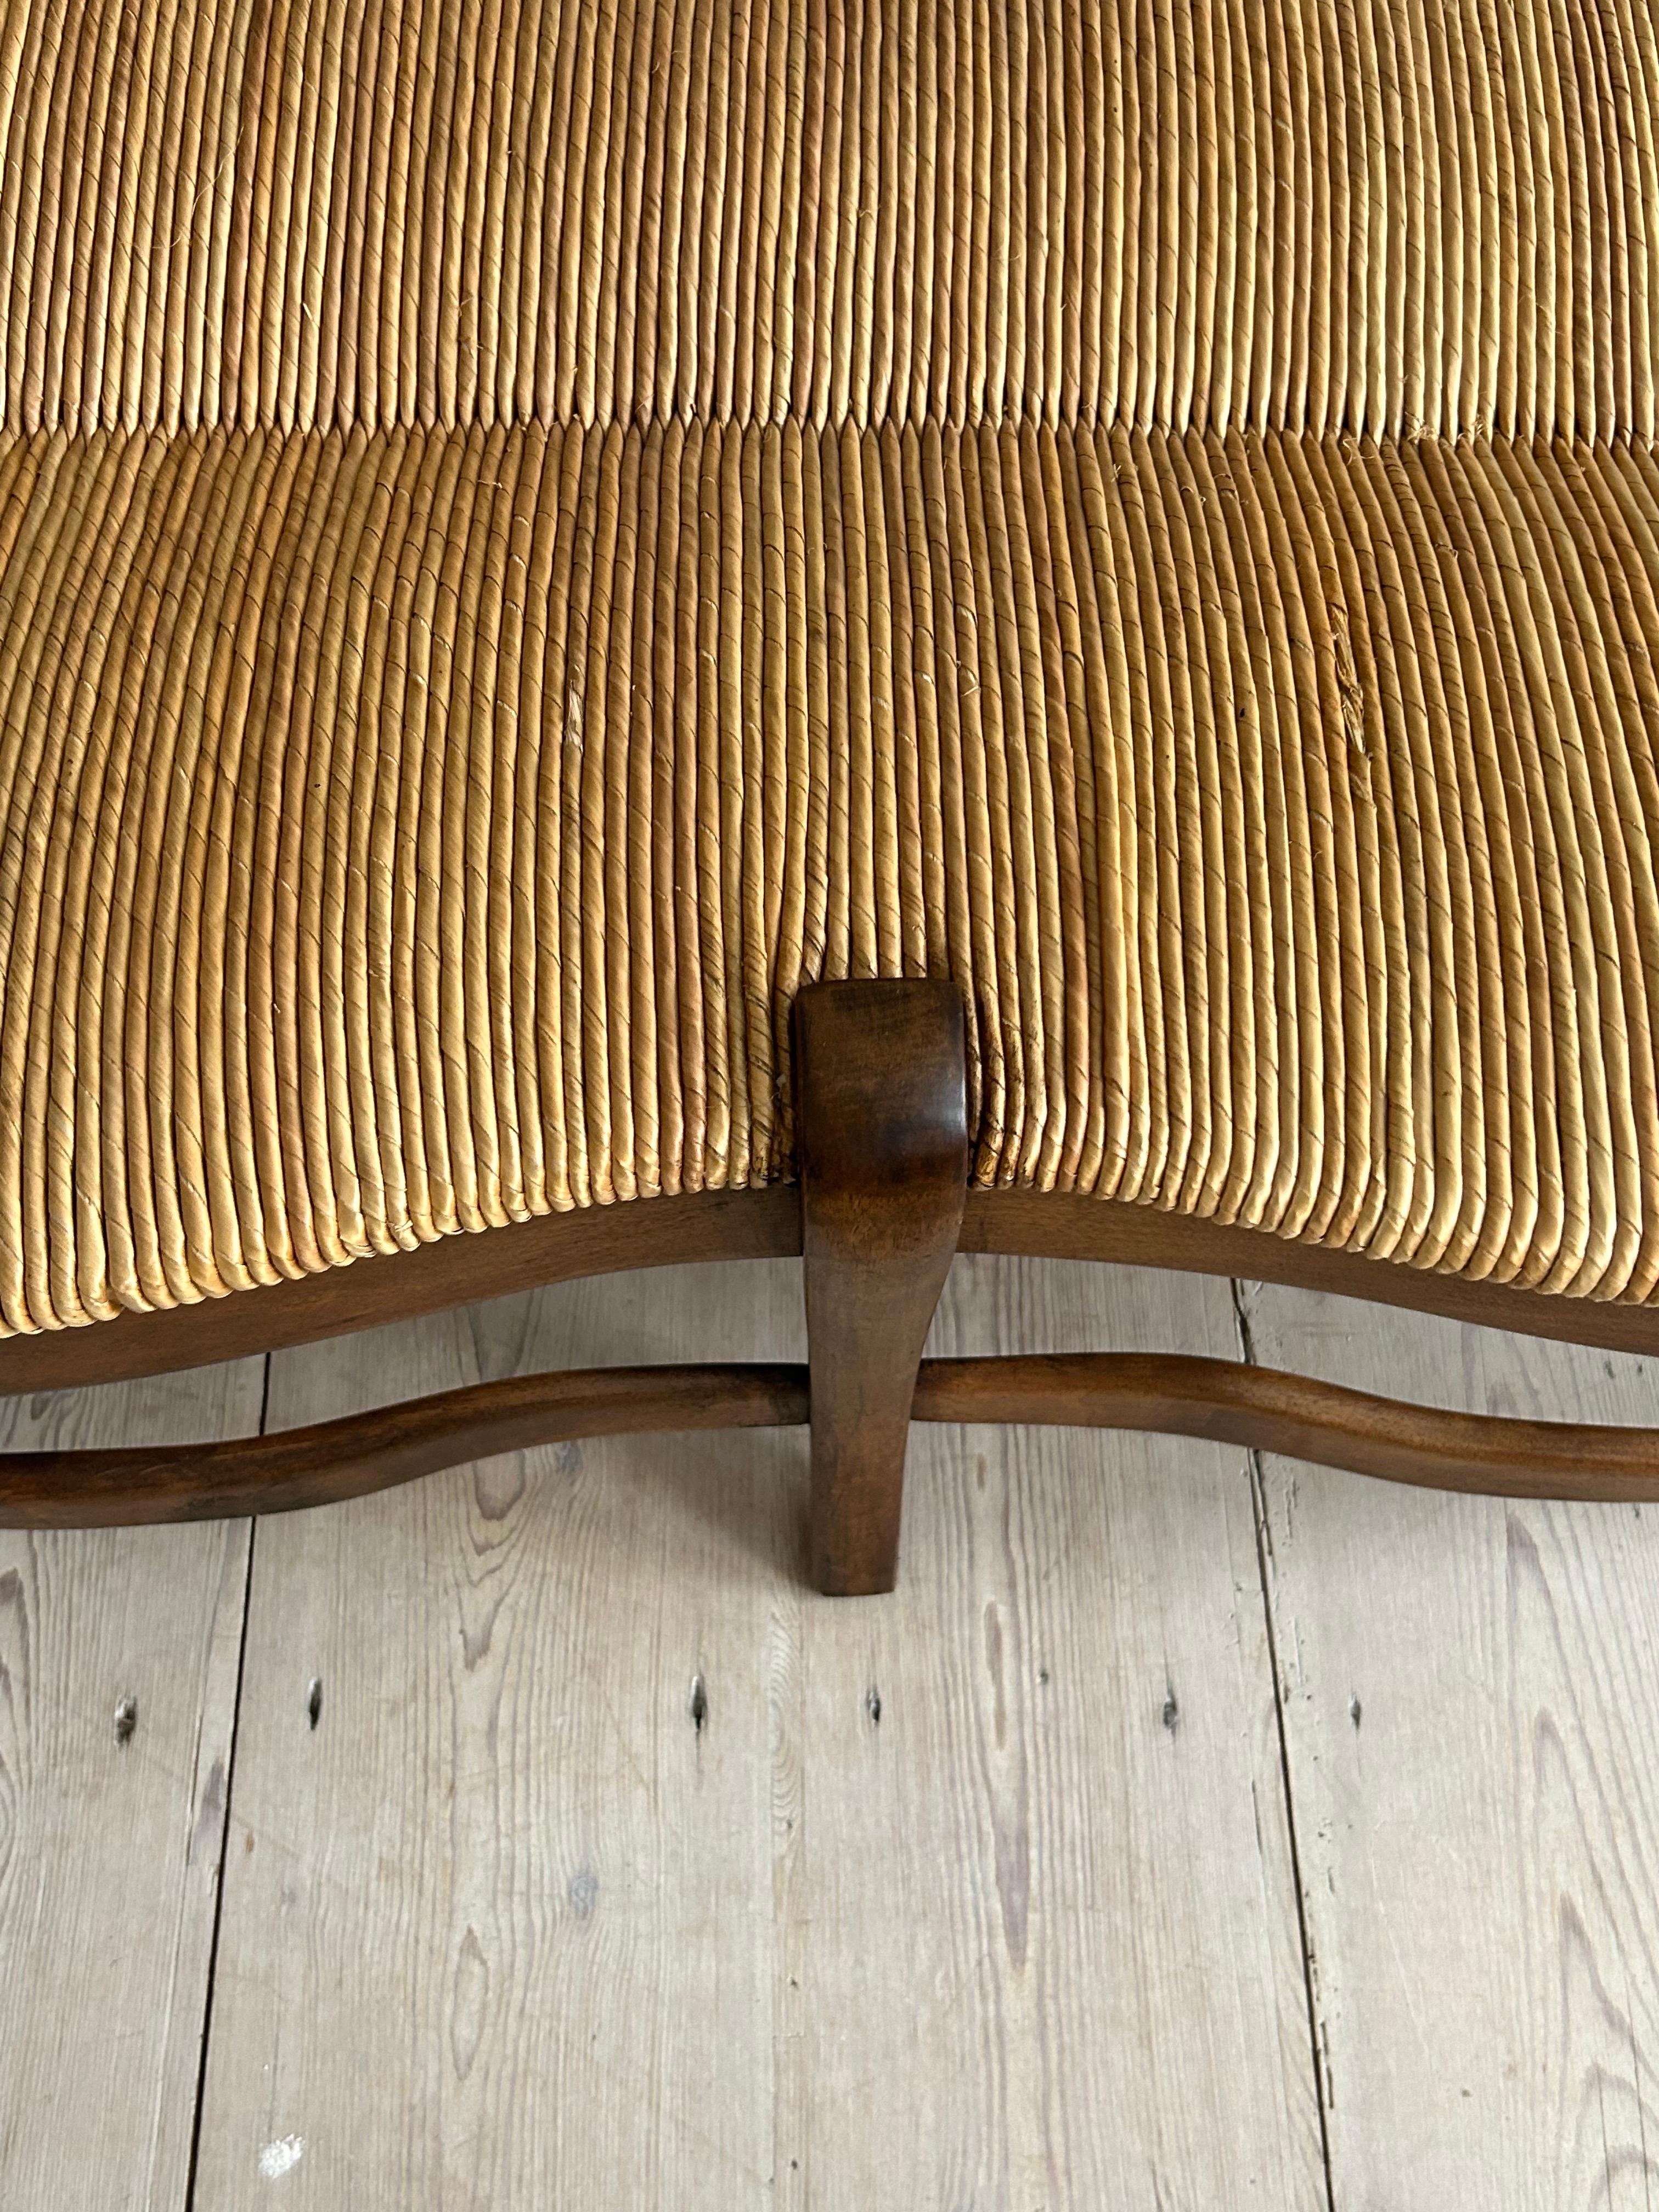 Antique Provence Bench in Curved Wood with Rush Seat, France, 19th Century For Sale 6